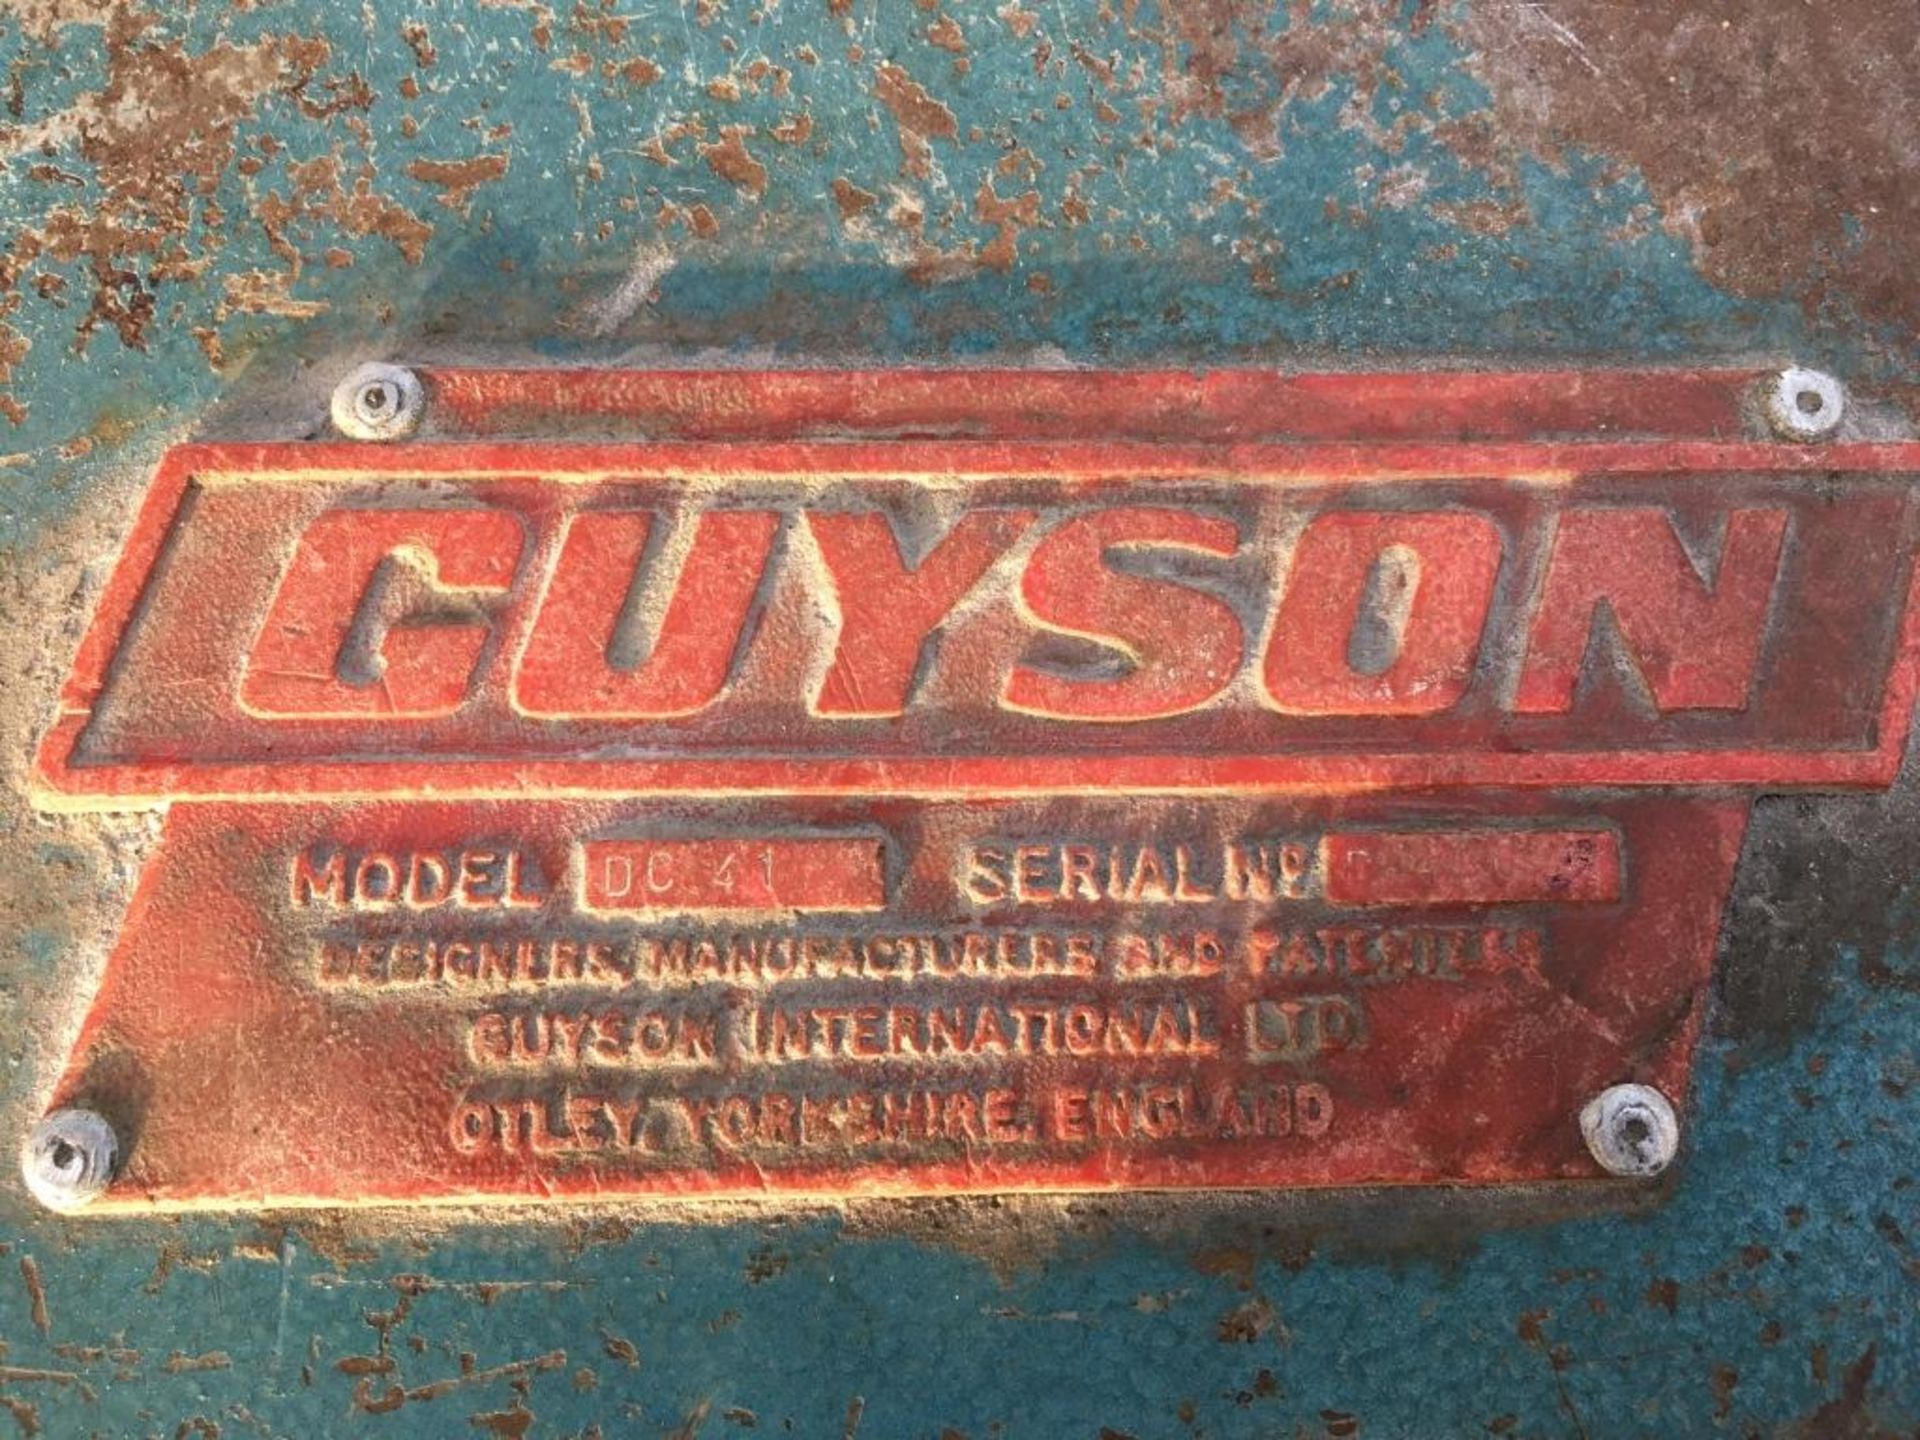 Guyson Super 6 bead blaster, Serial No. A15952 with Guyson DC41 dust extraction and CompAir - Image 4 of 6